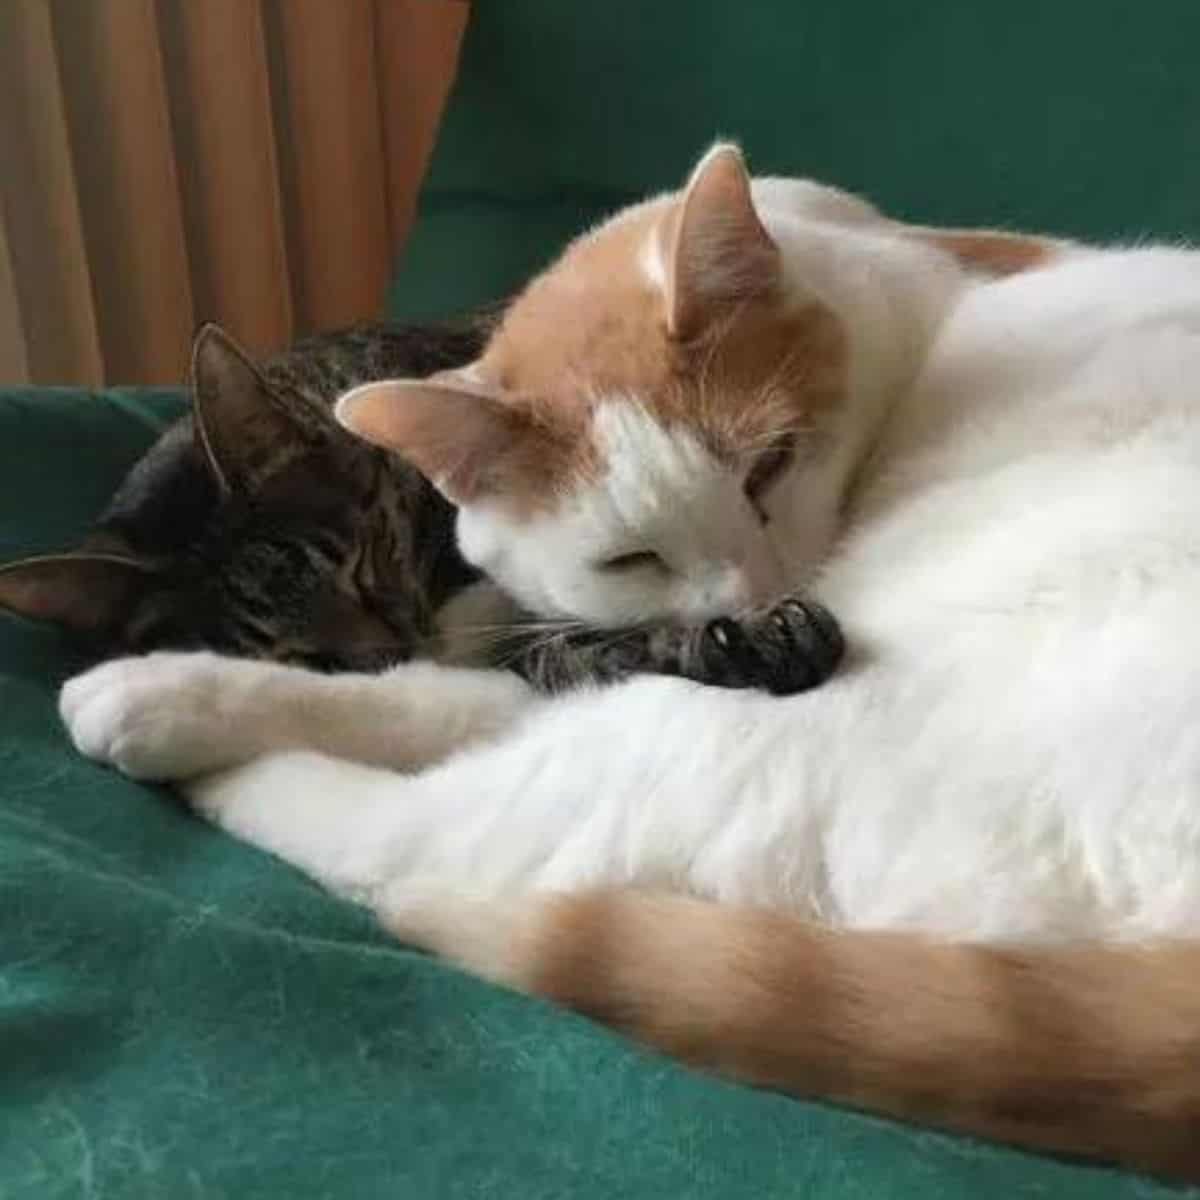 Two cats sleeping together